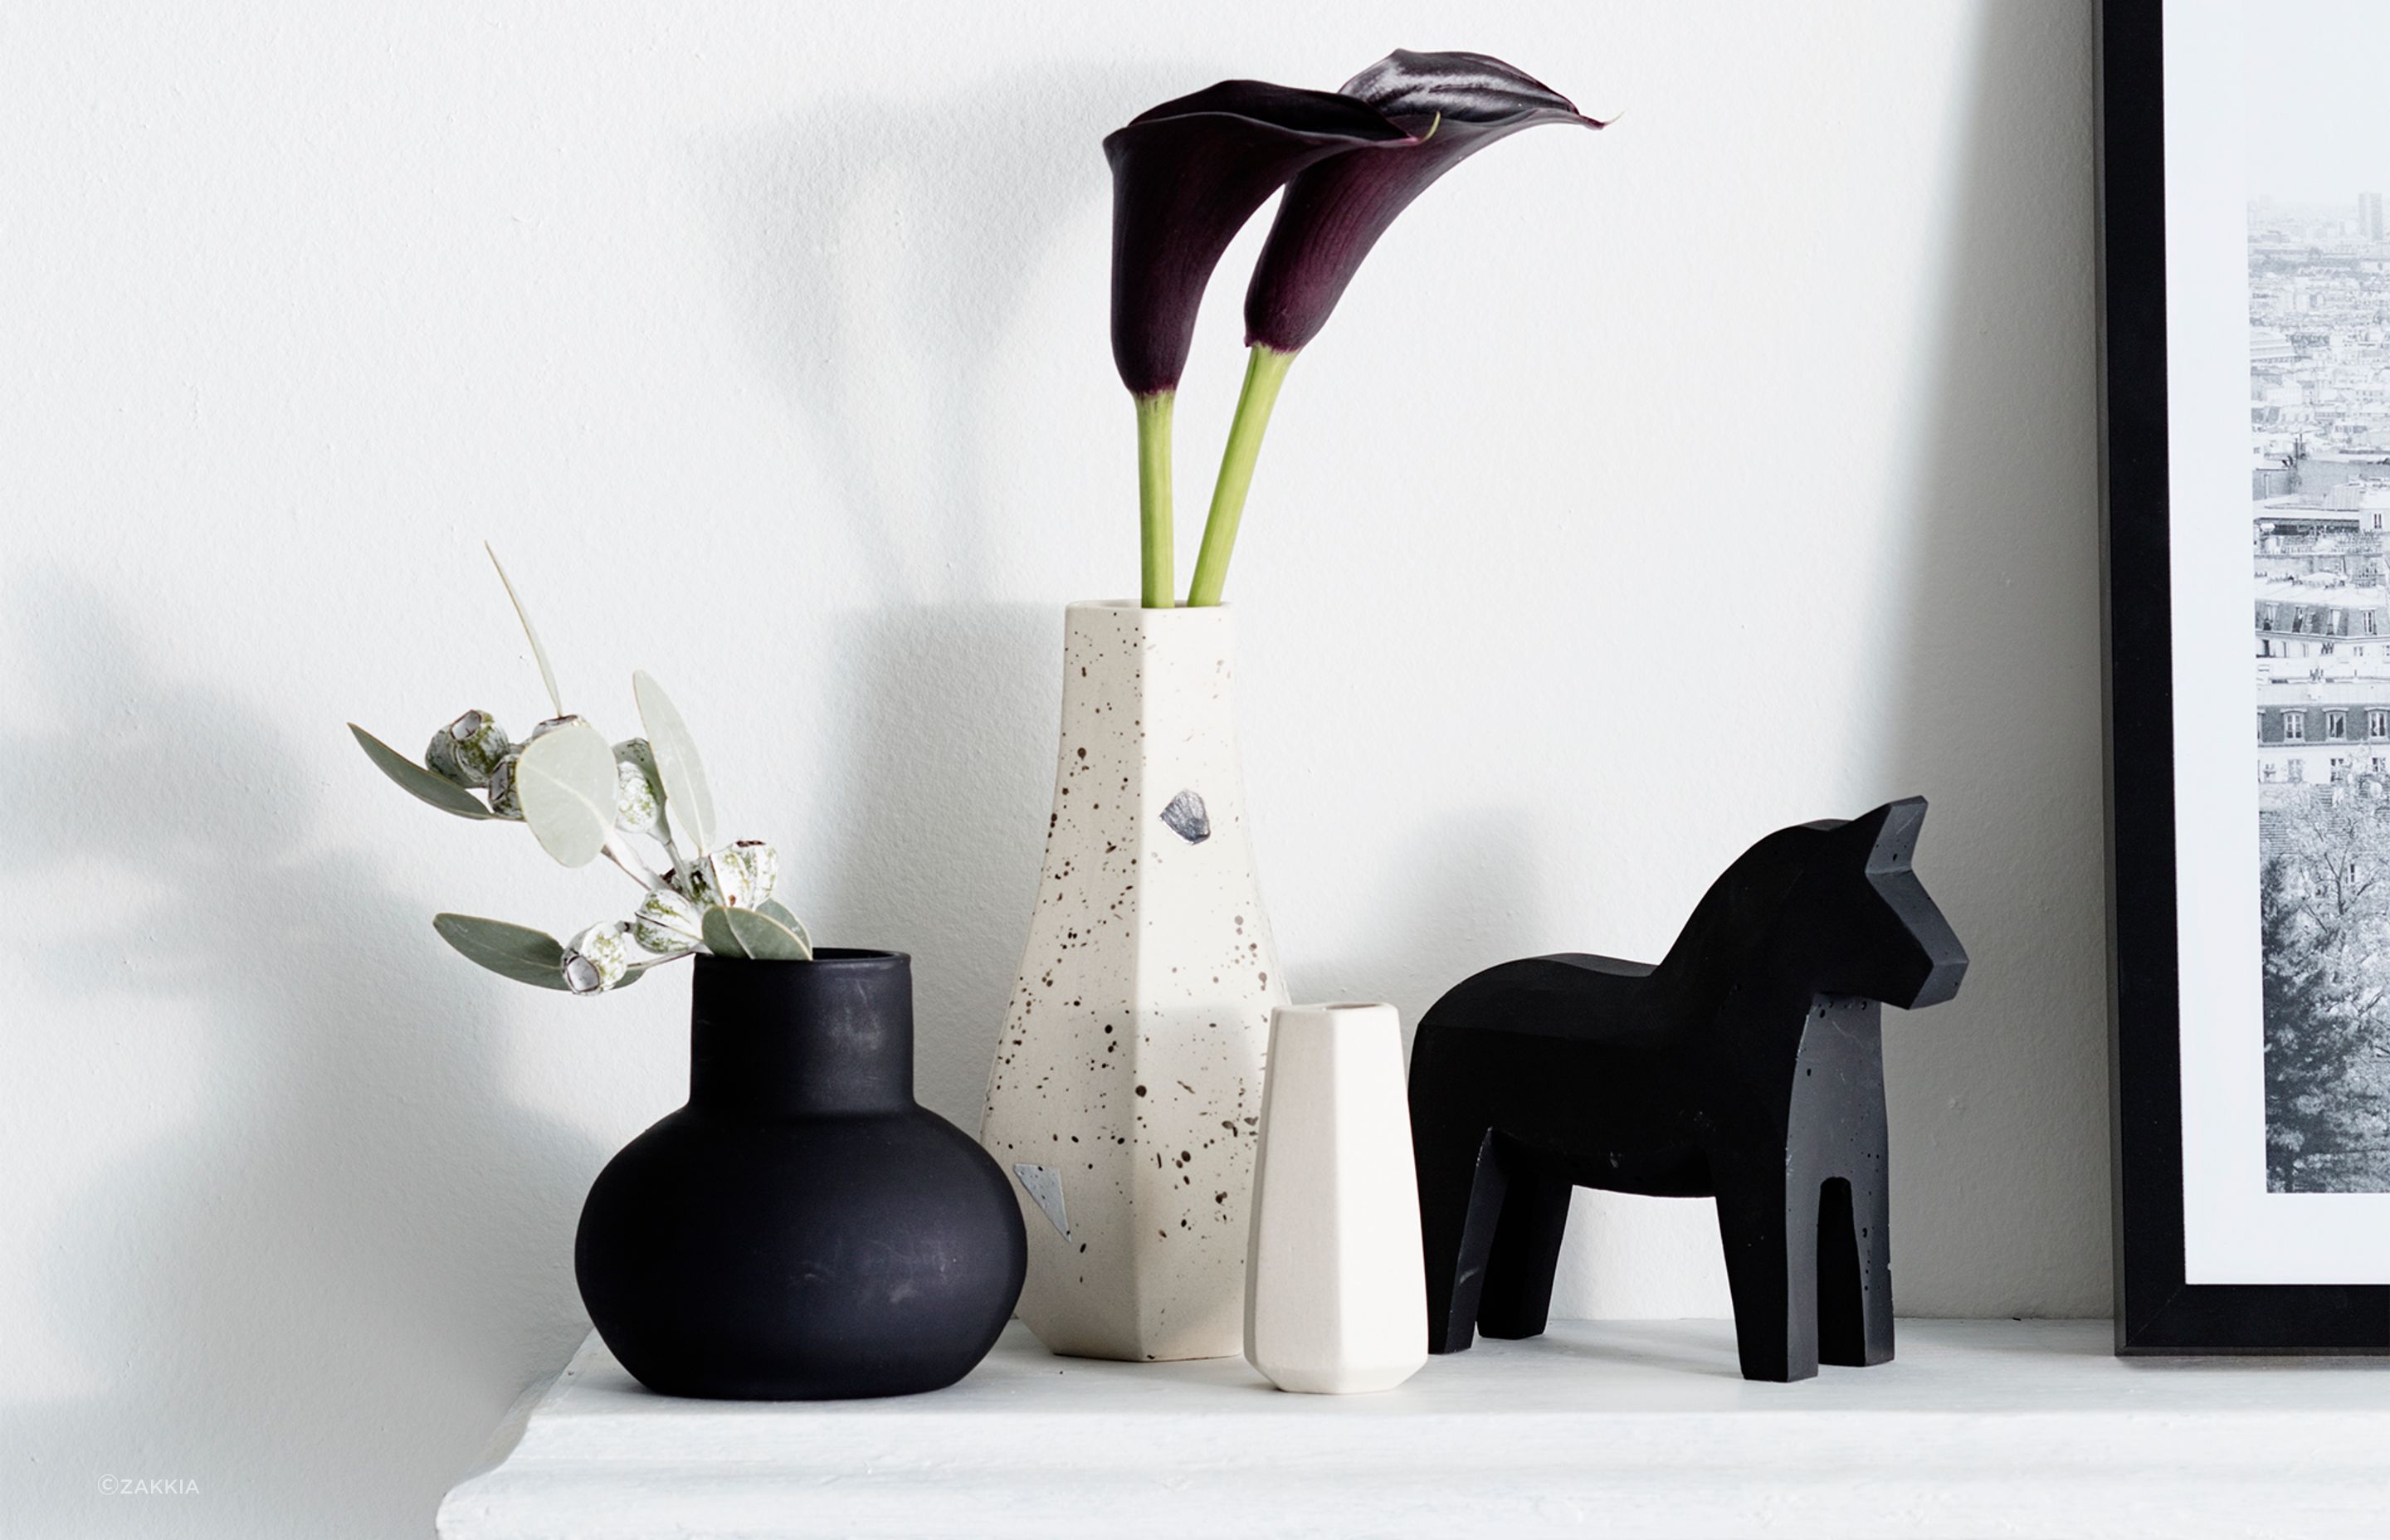 Functional yet decorative accessories such as this beautiful vase by Zakkia are great additions to a living room.